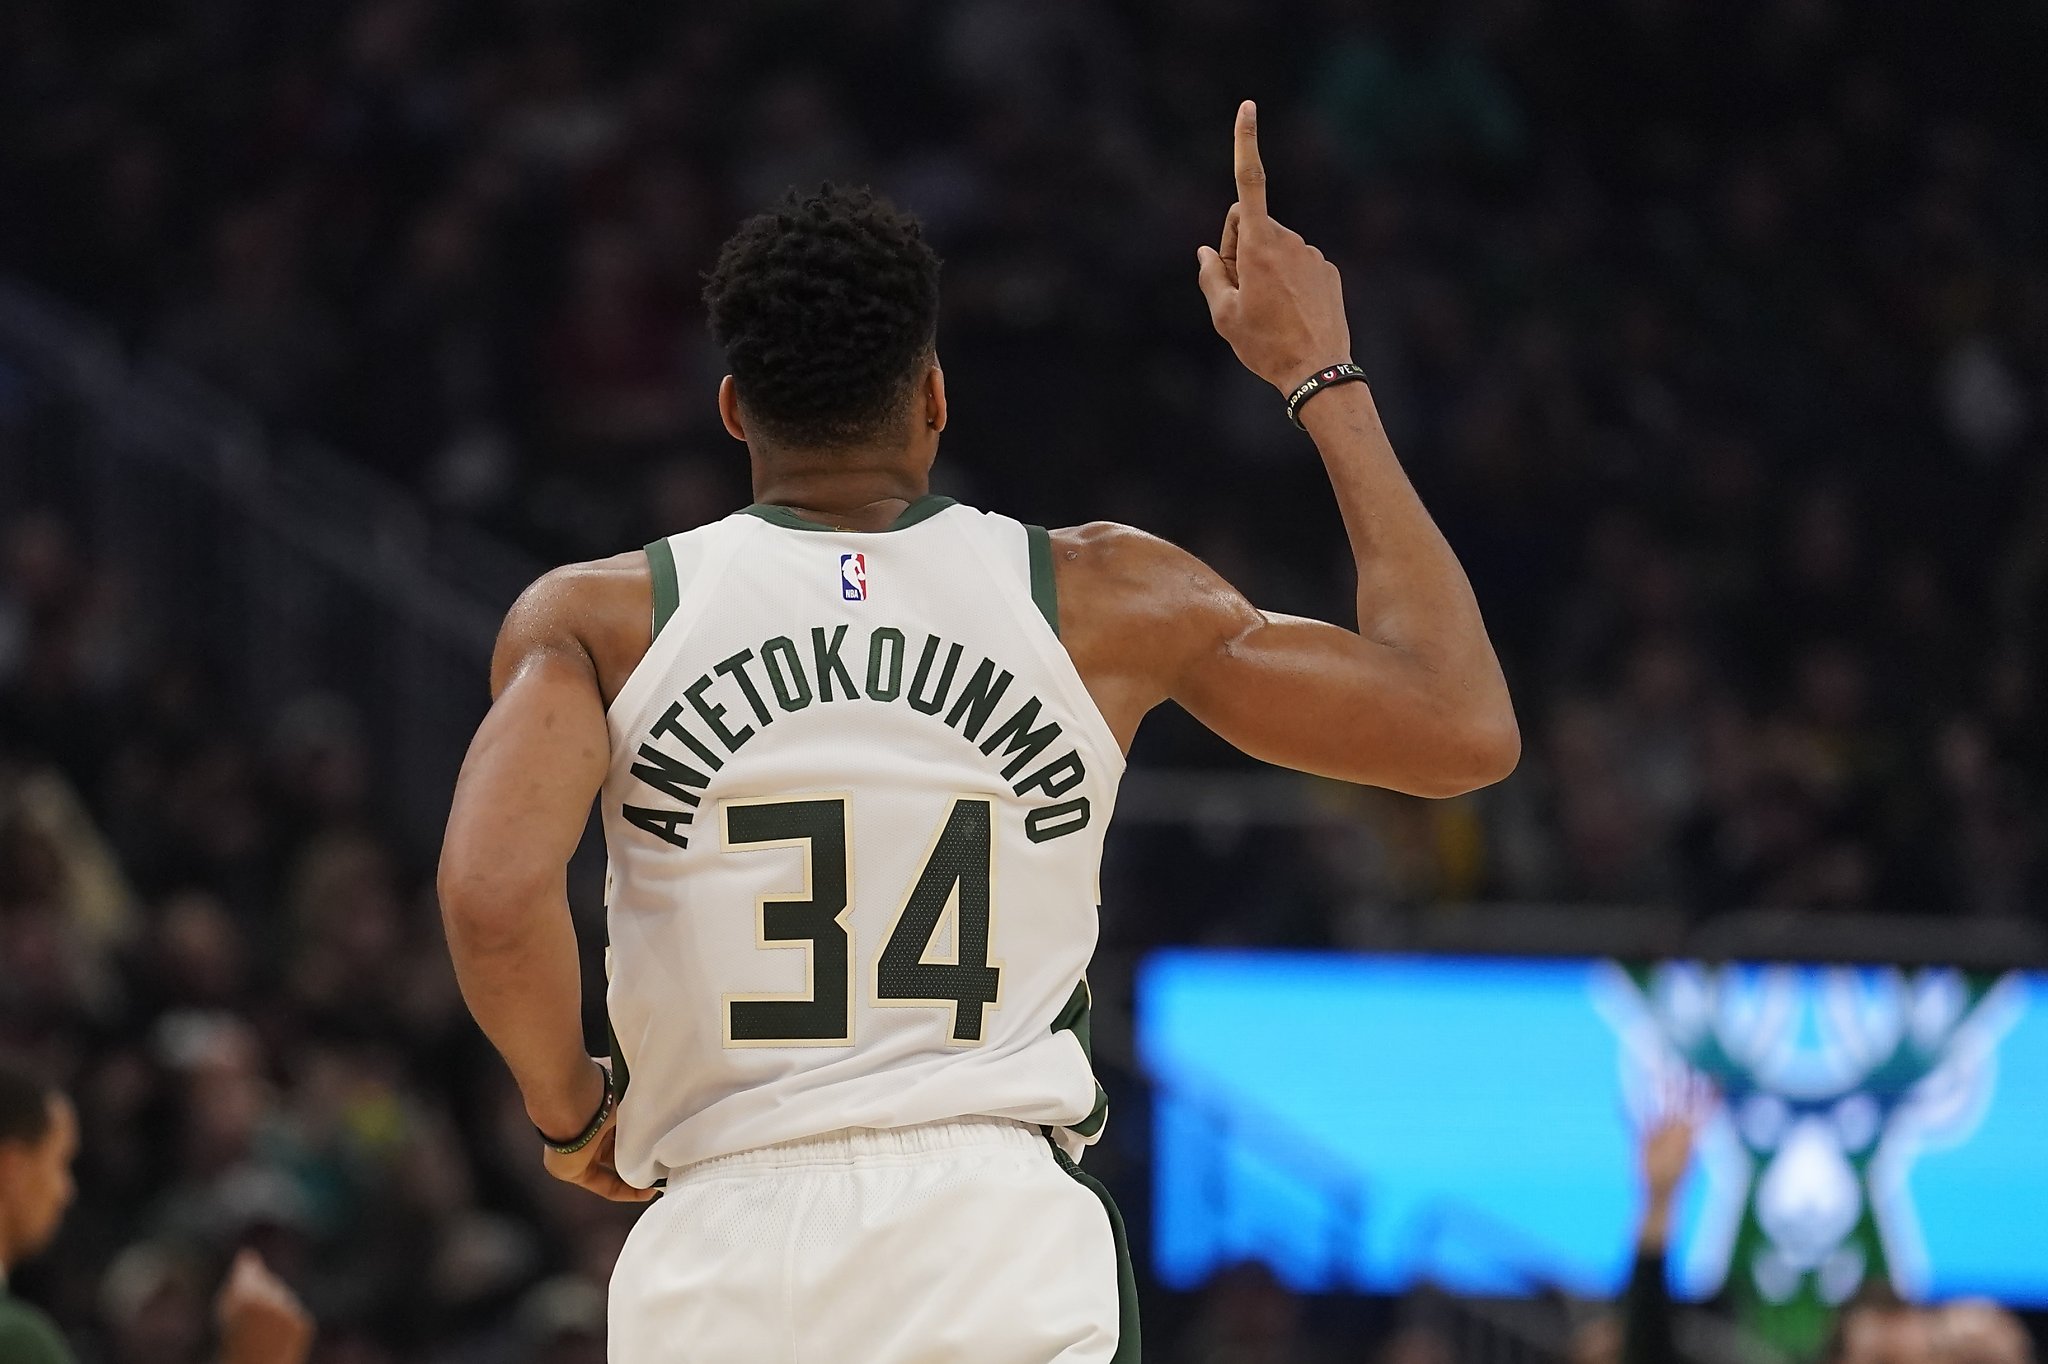 Giannis Antetokounmpo helps Bucks to 18th victory in a row.